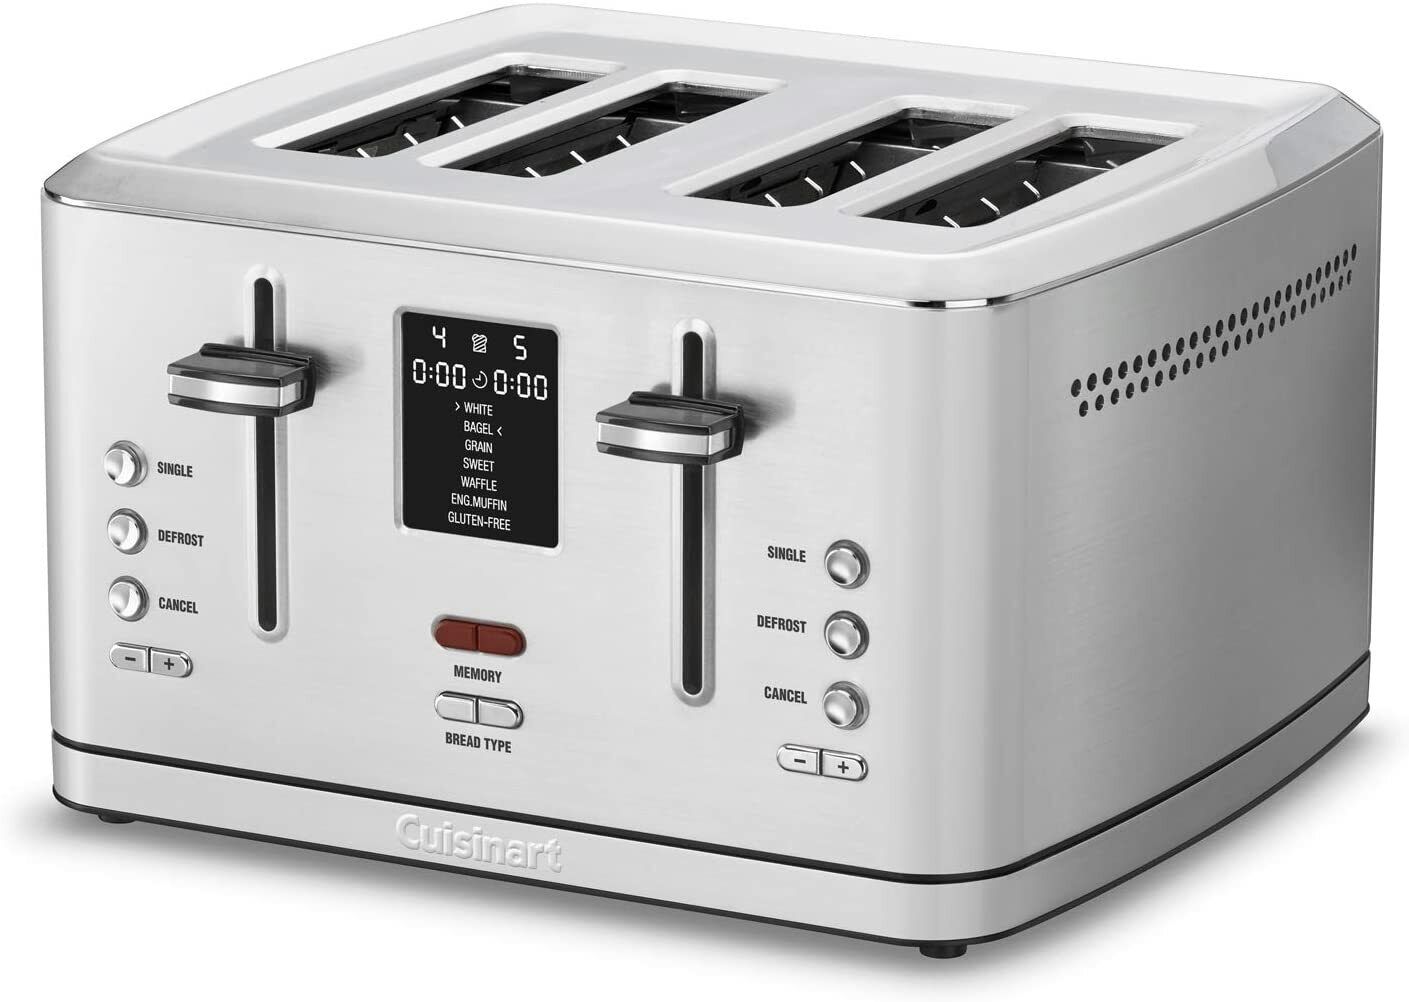 Cuisinart CPT-740 4-Slice Digital Toaster with MemorySet Feature - Silver